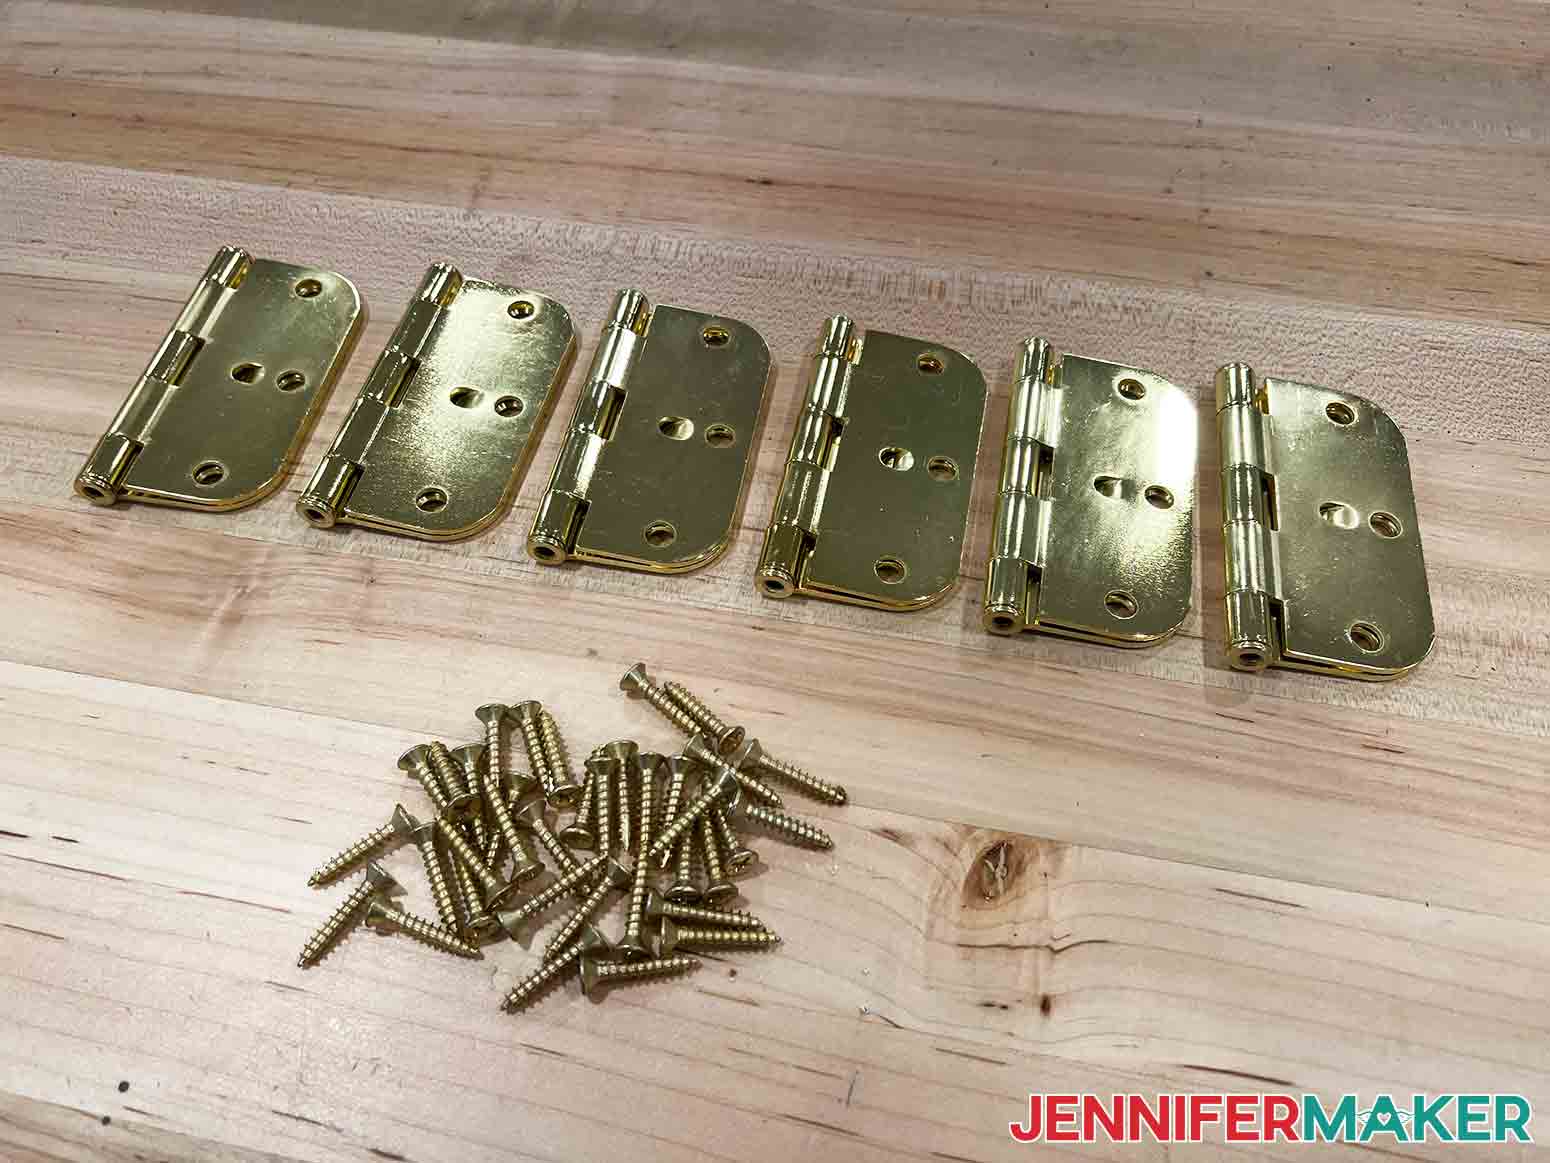 Six brass hinges and screws for the wood DIY backdrop stand